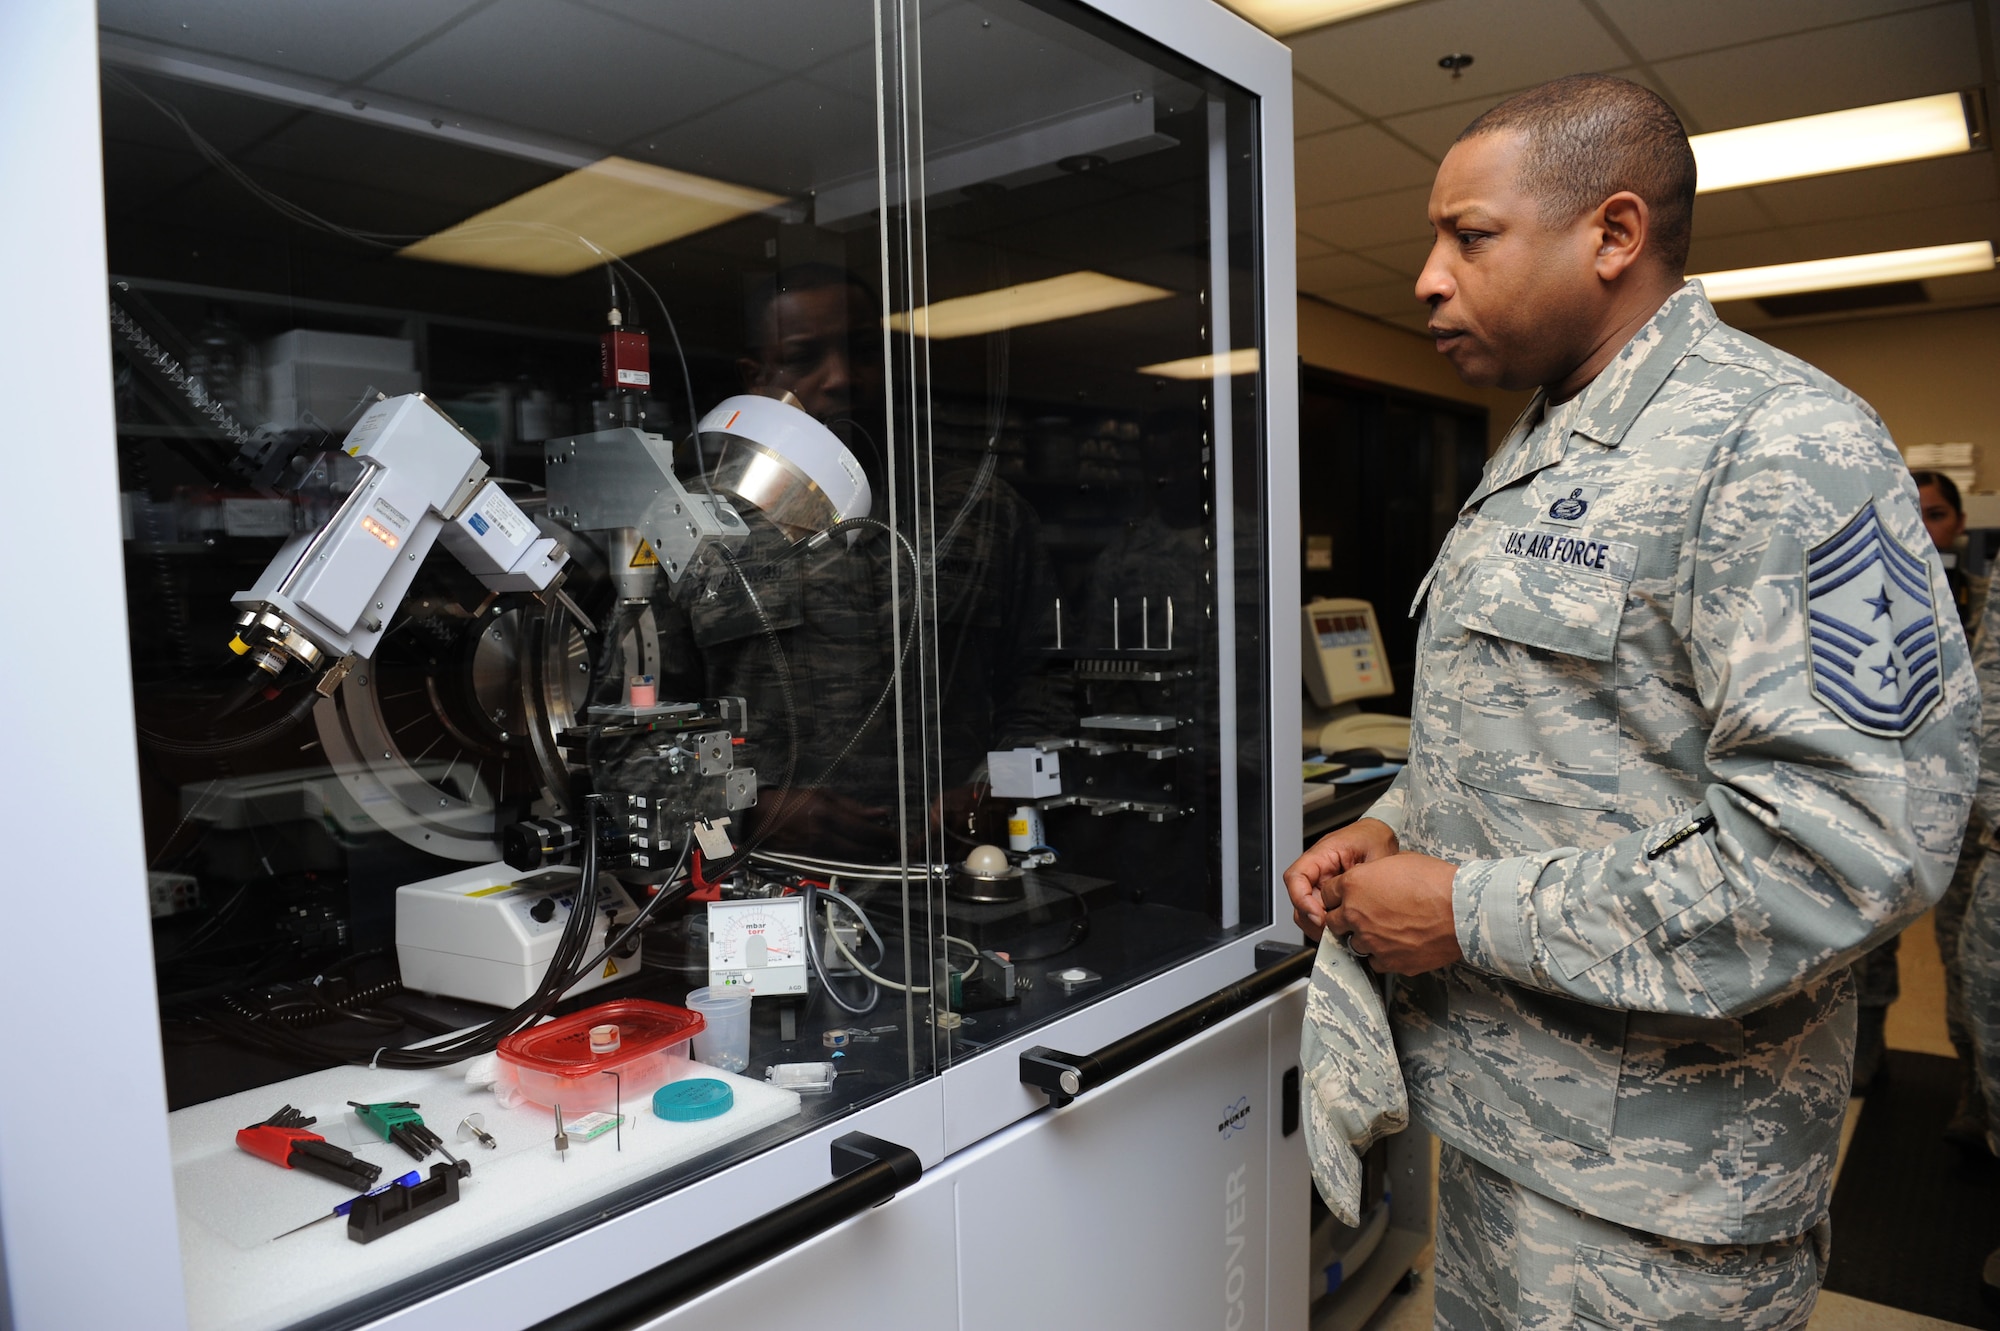 Chief Master Sgt. Farrell Thomas, 2nd Air Force command chief, views training equipment during an immersion tour at the clinical research lab Mar.8, 2016, Keesler Air Force Base, Miss. Thomas visited the 81st Medical Group to become oriented with group missions, operations and personnel. (U.S. Air Force photo by Kemberly Groue)

